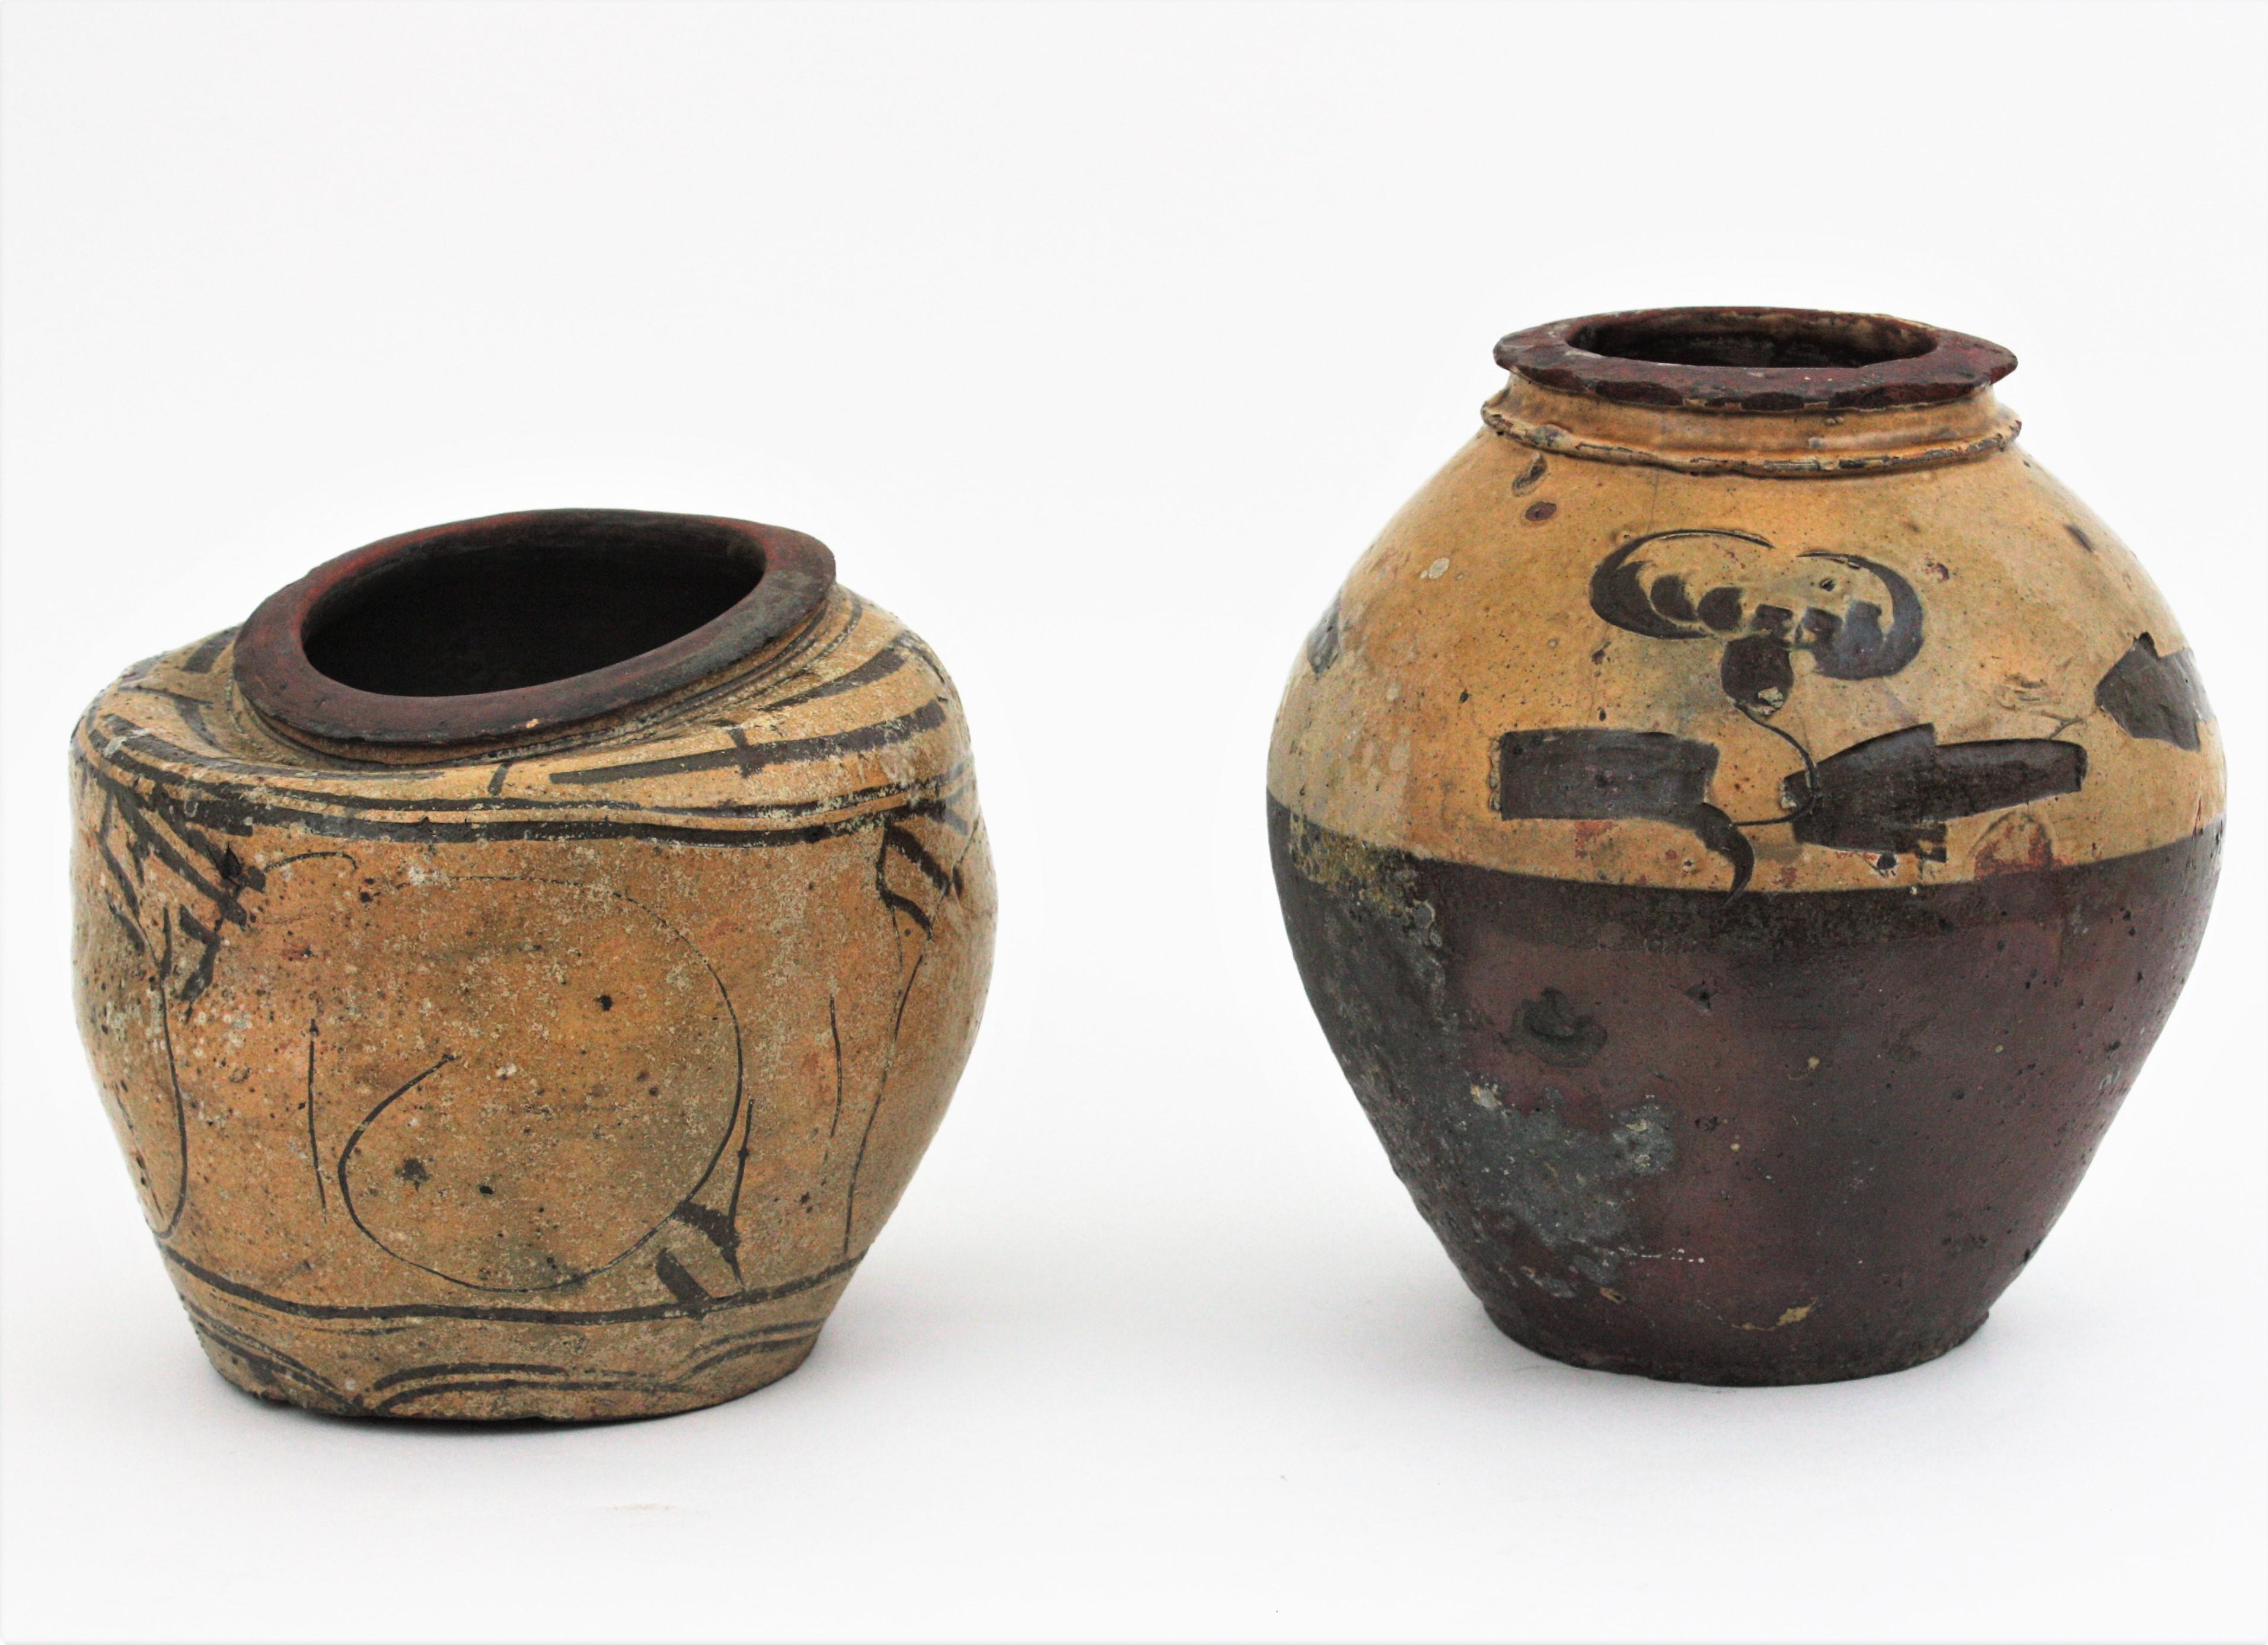 Pair of urn shapped terracotta pots or vessels wiht glazed decorations, China, 1930s.
Provincial rustic handmade terracotta wine jars or preserving pots.
The taller one is covered by glazed ceramic in cream color from the medium part to the top. It